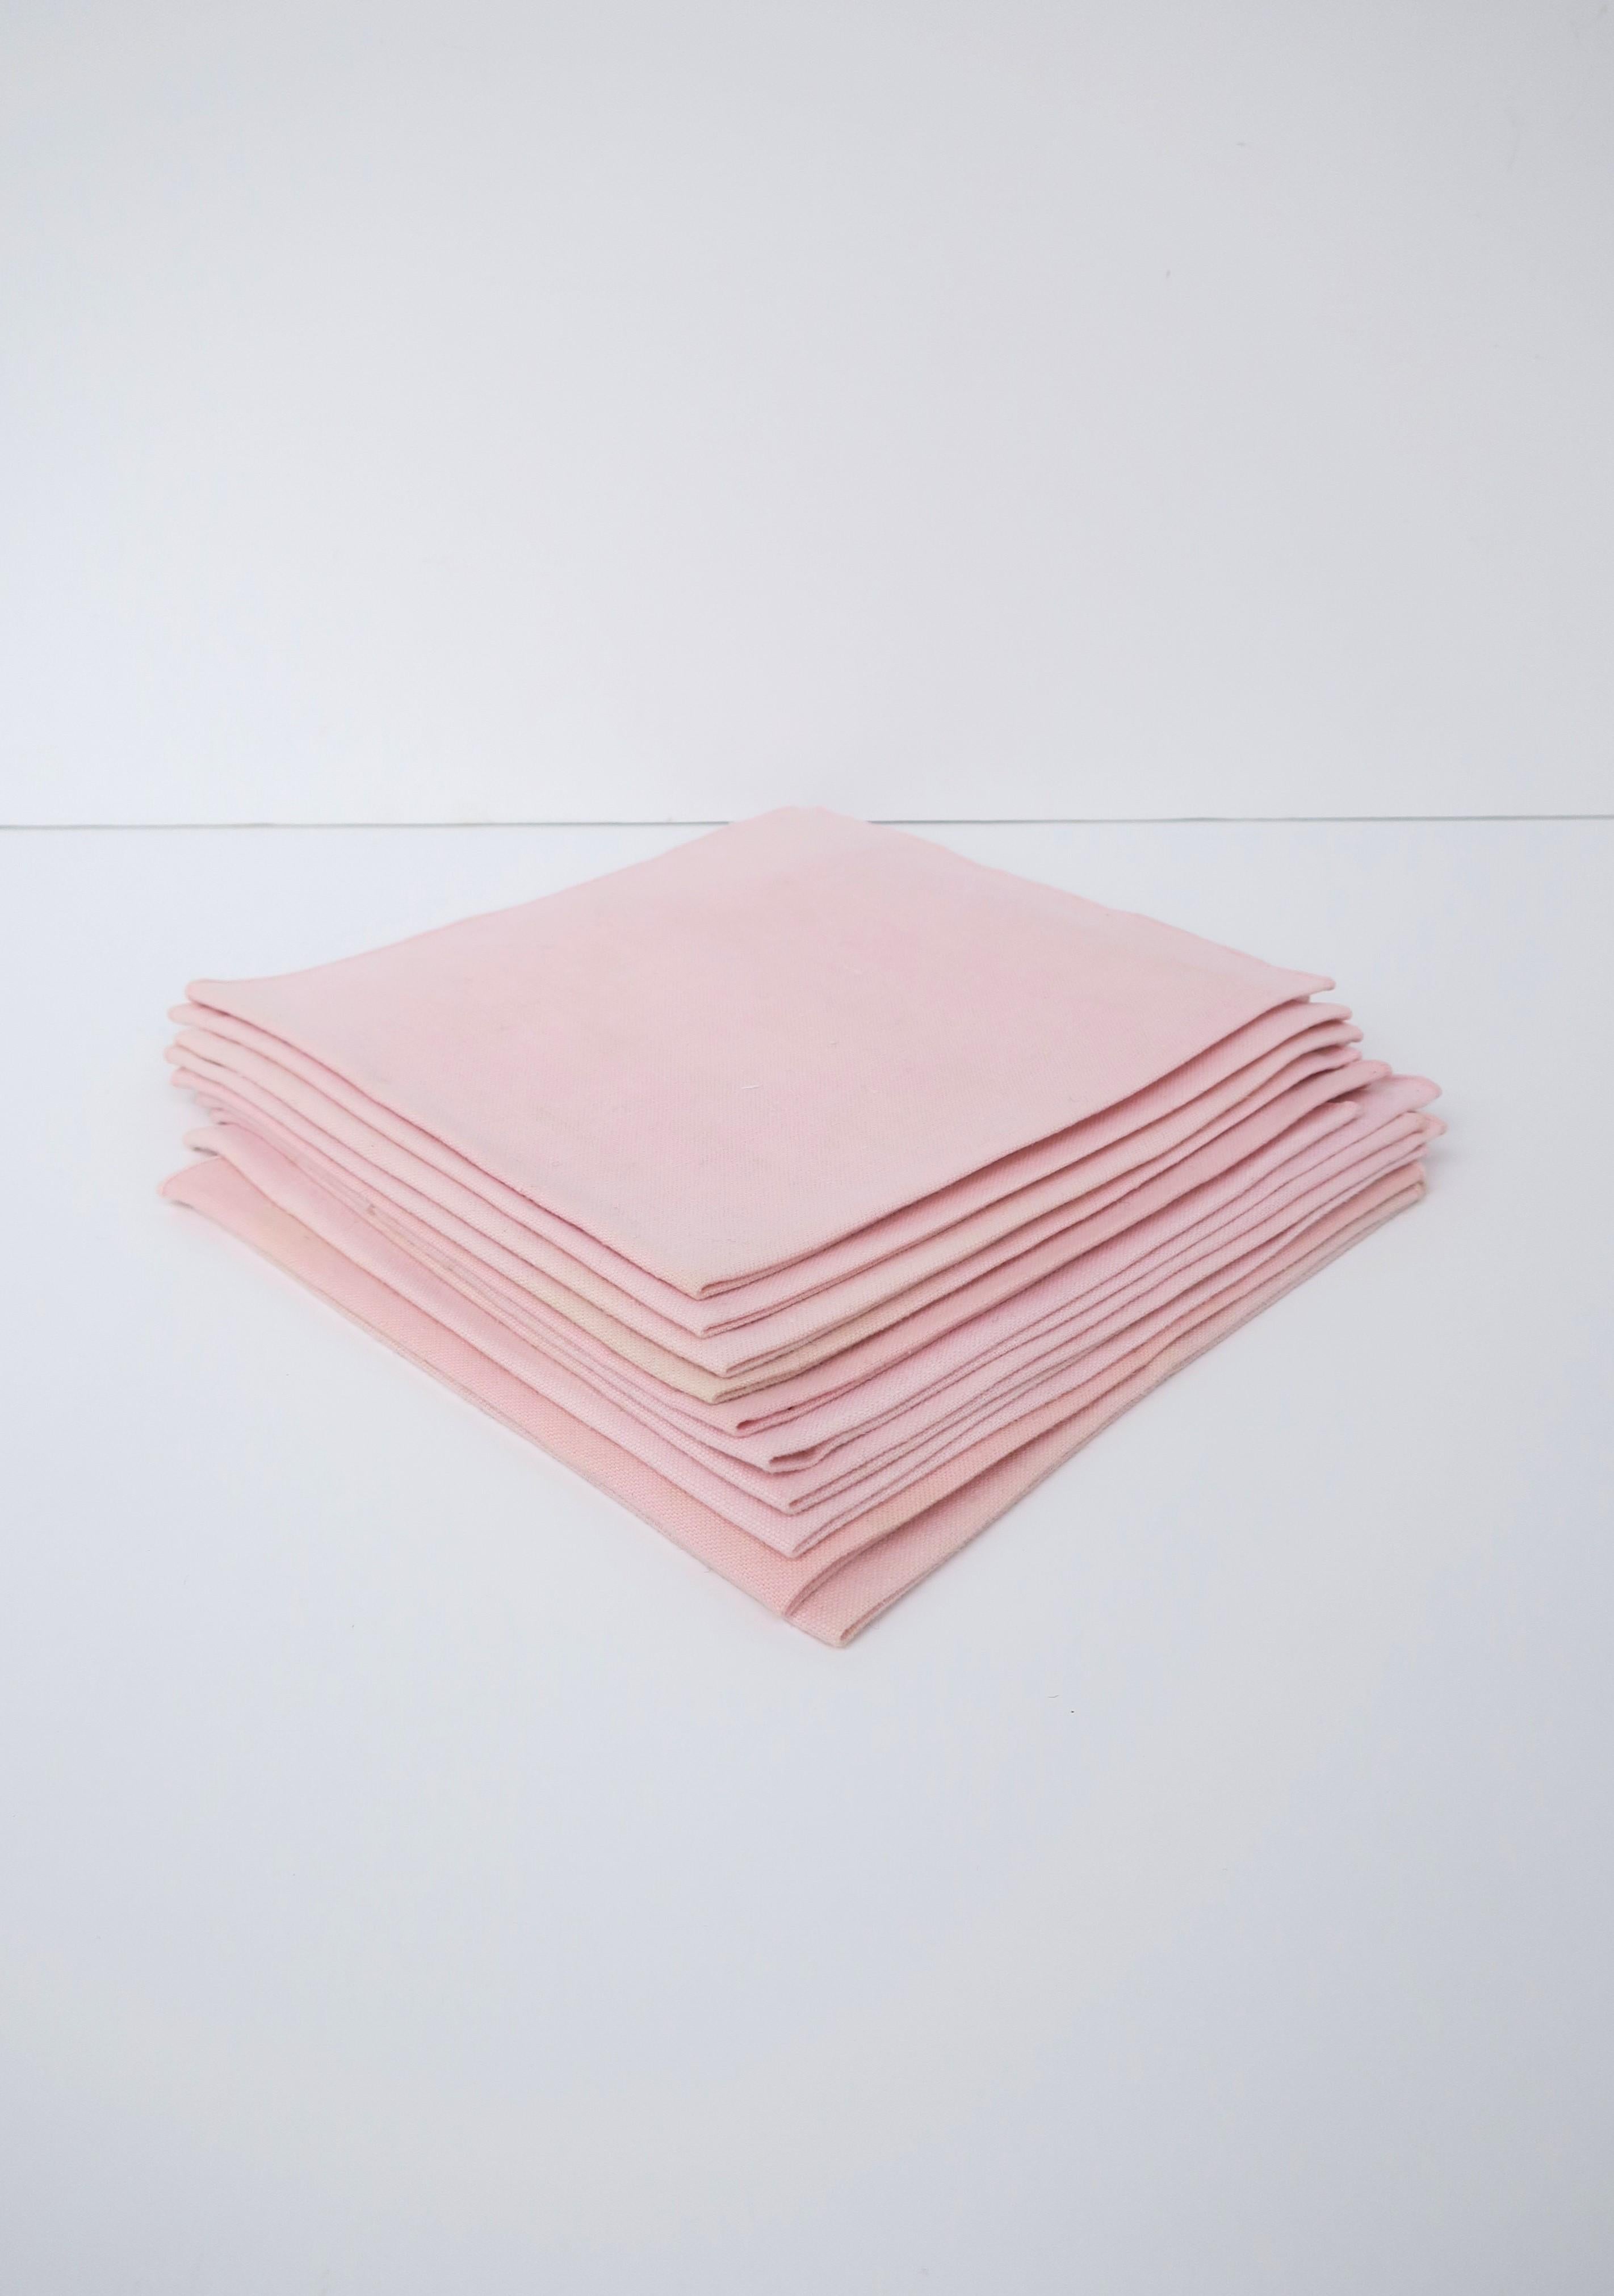 Pink Linen Dinner Napkins, Set of 10 In Good Condition For Sale In New York, NY